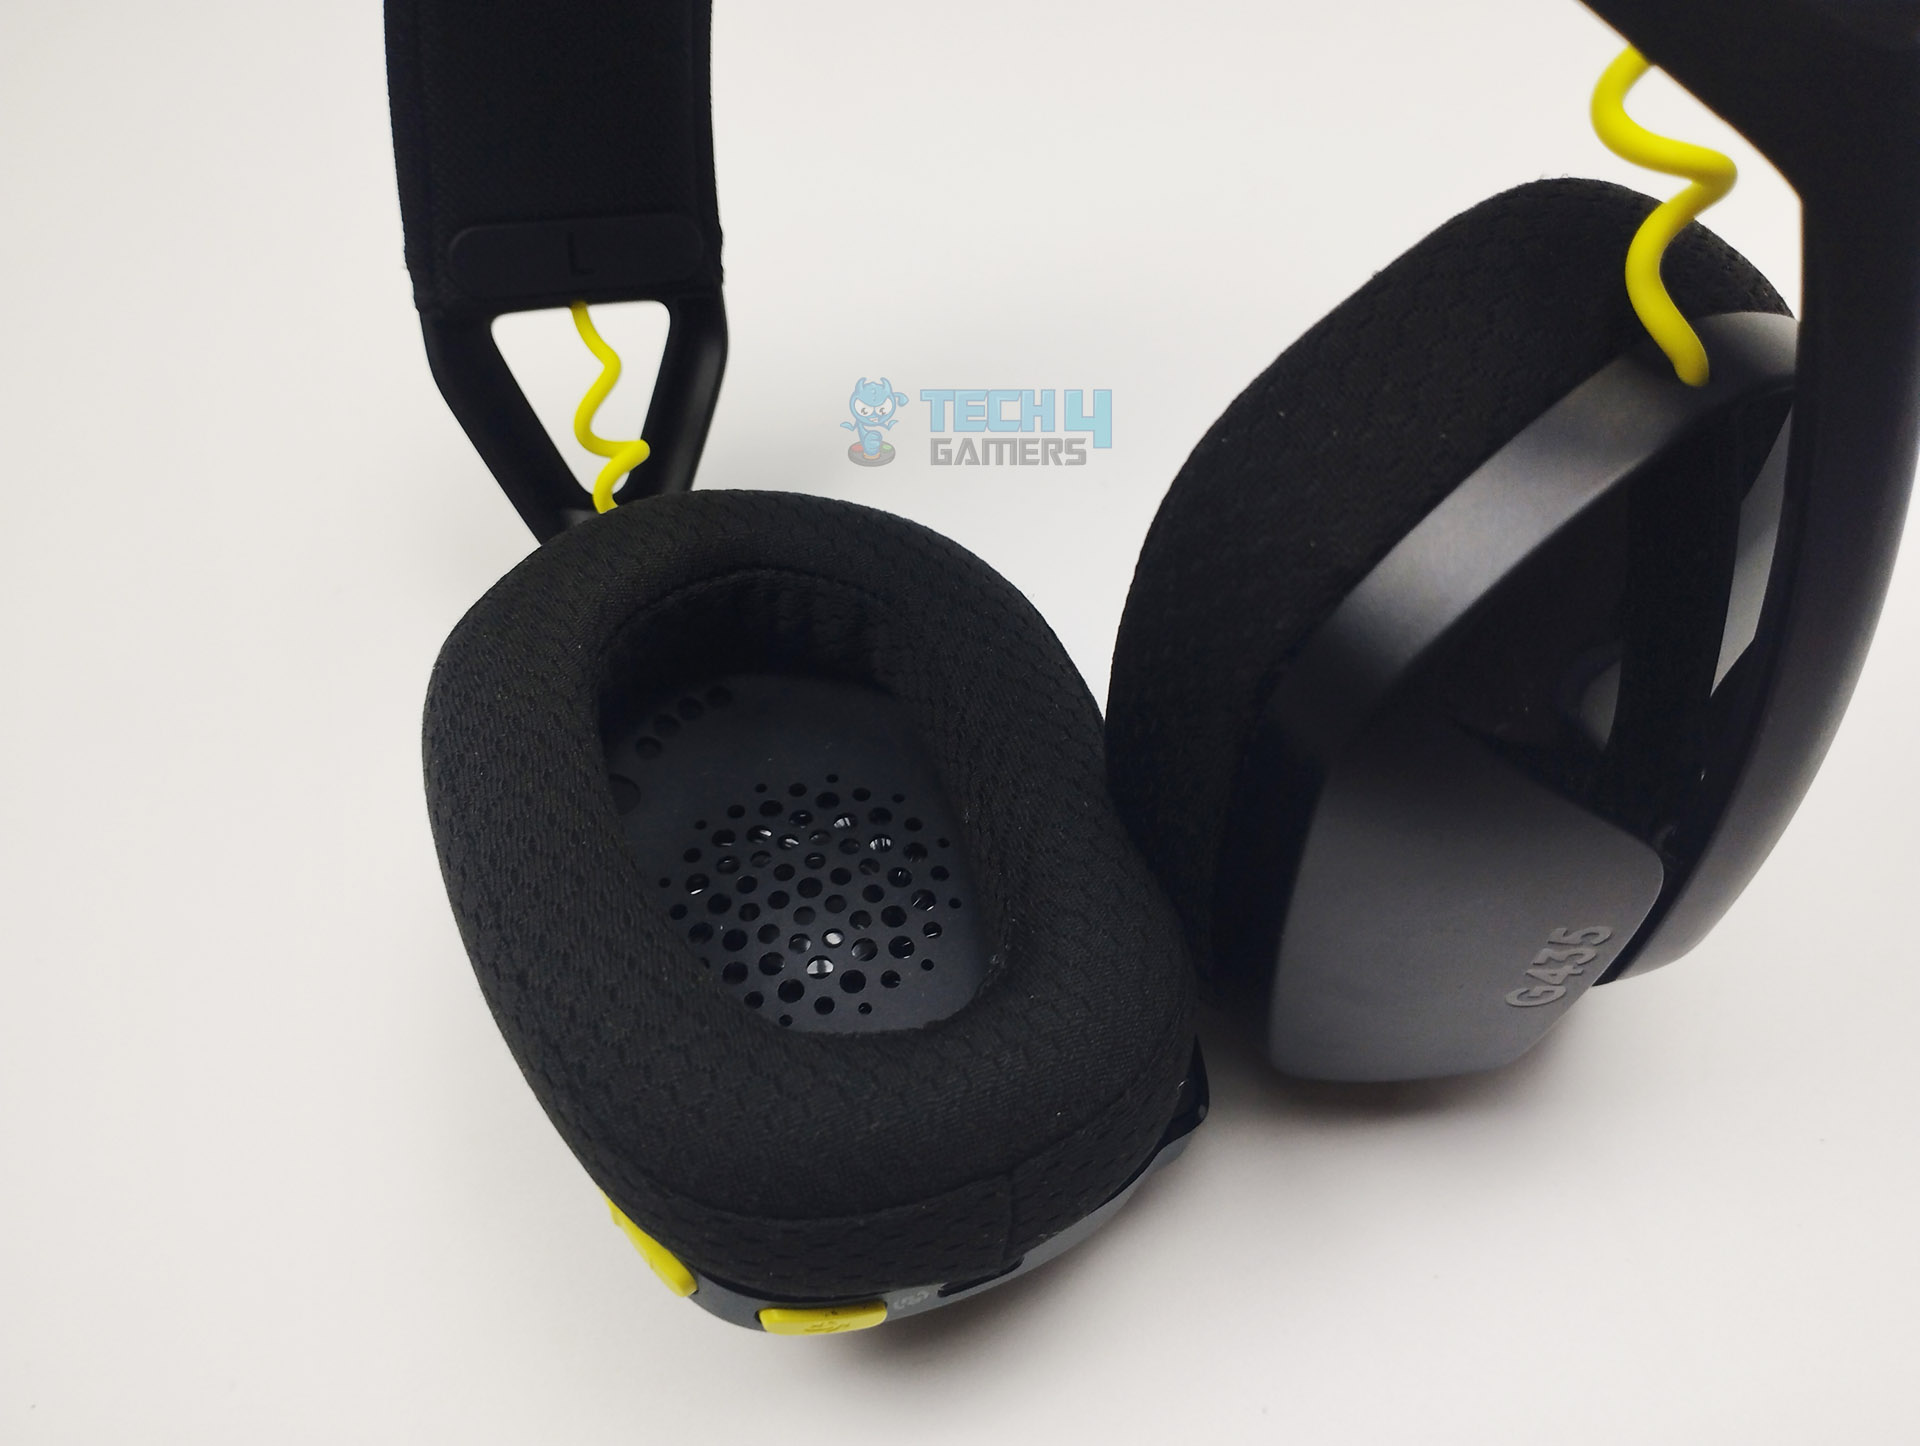 Earcups (Image By Tech4Gamers)